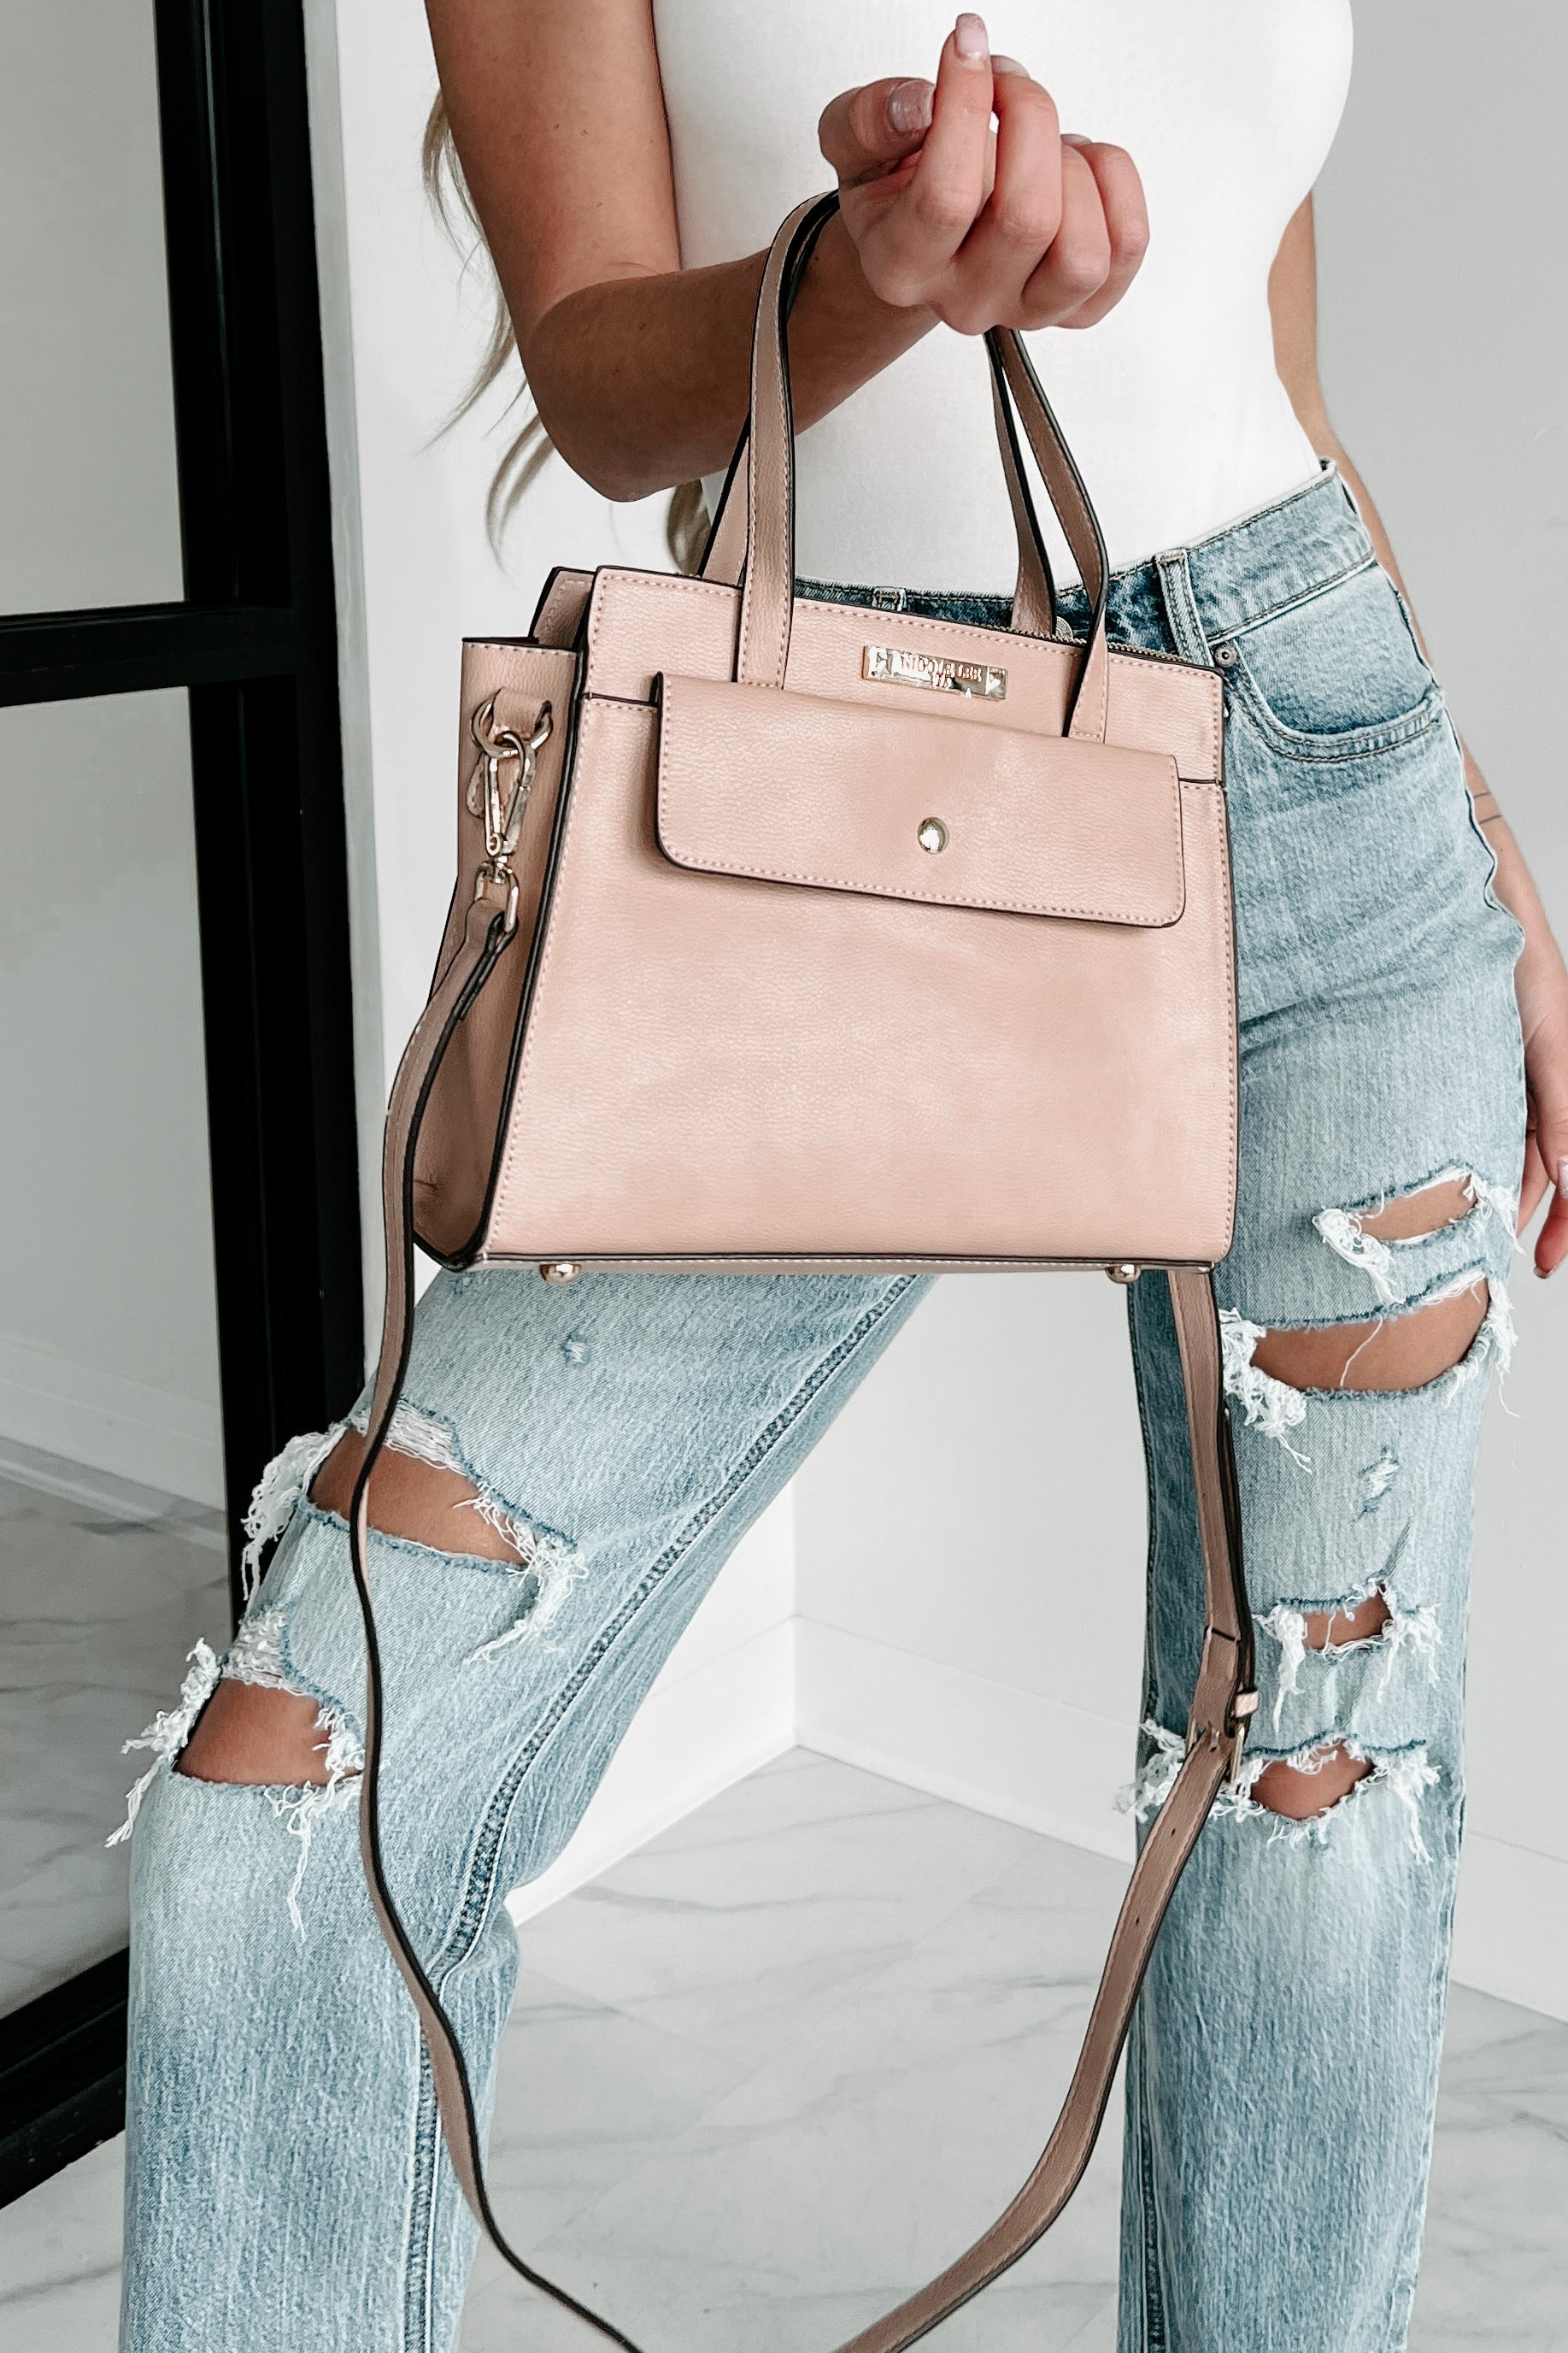 Nicole Lee Romance In Paris Square Shoulder Bag. ⋆ Spend With Us - Buy From  a Bush Business Marketplace